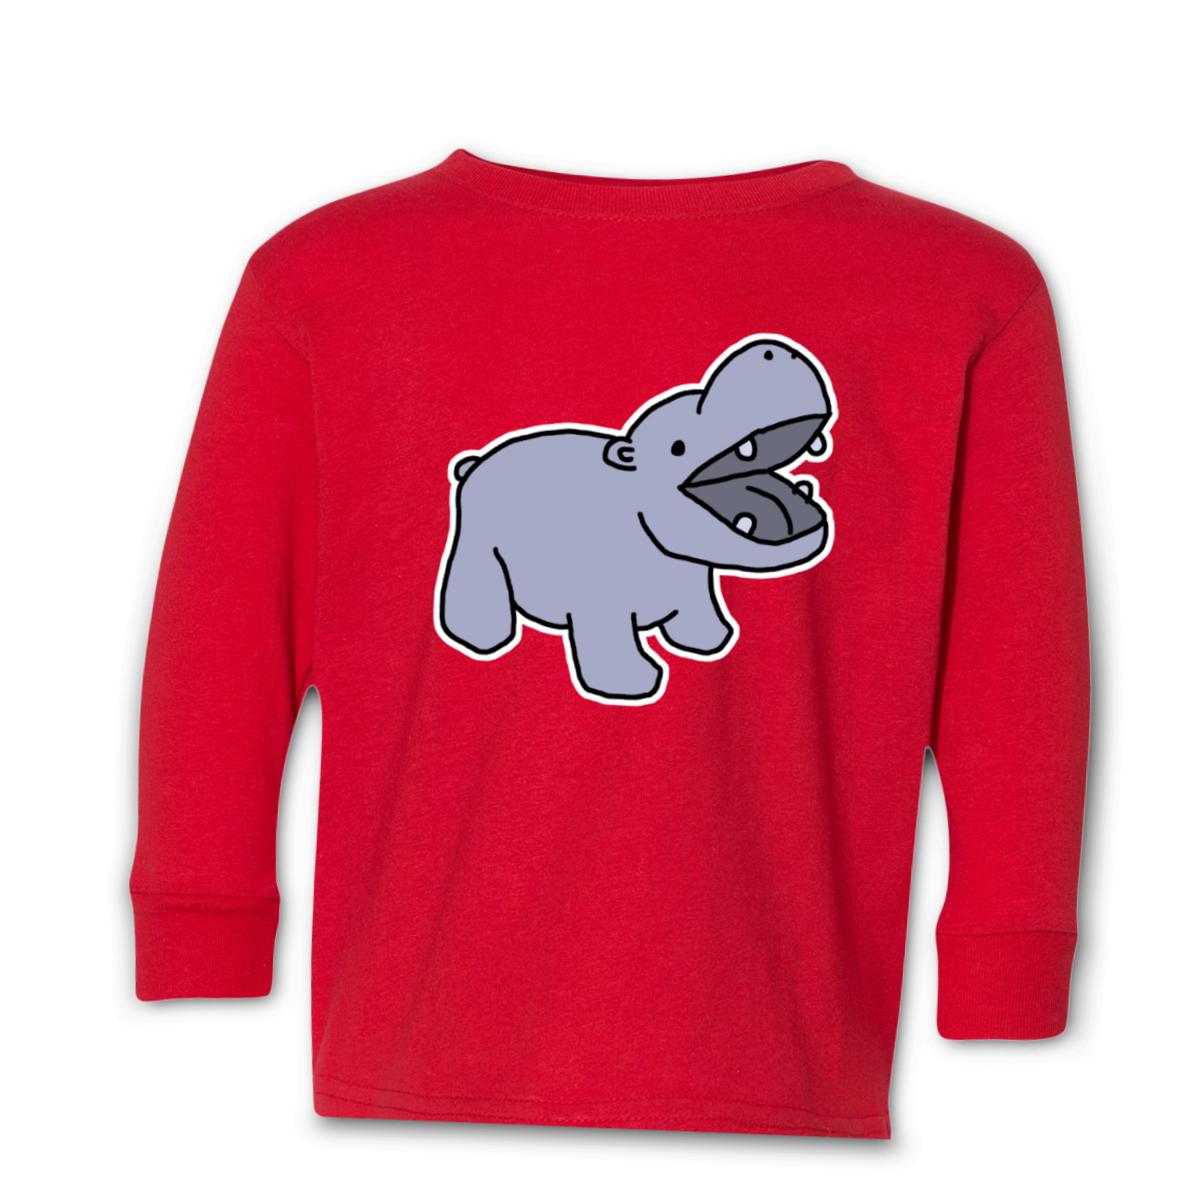 Toy Hippo Kid's Long Sleeve Tee Small red